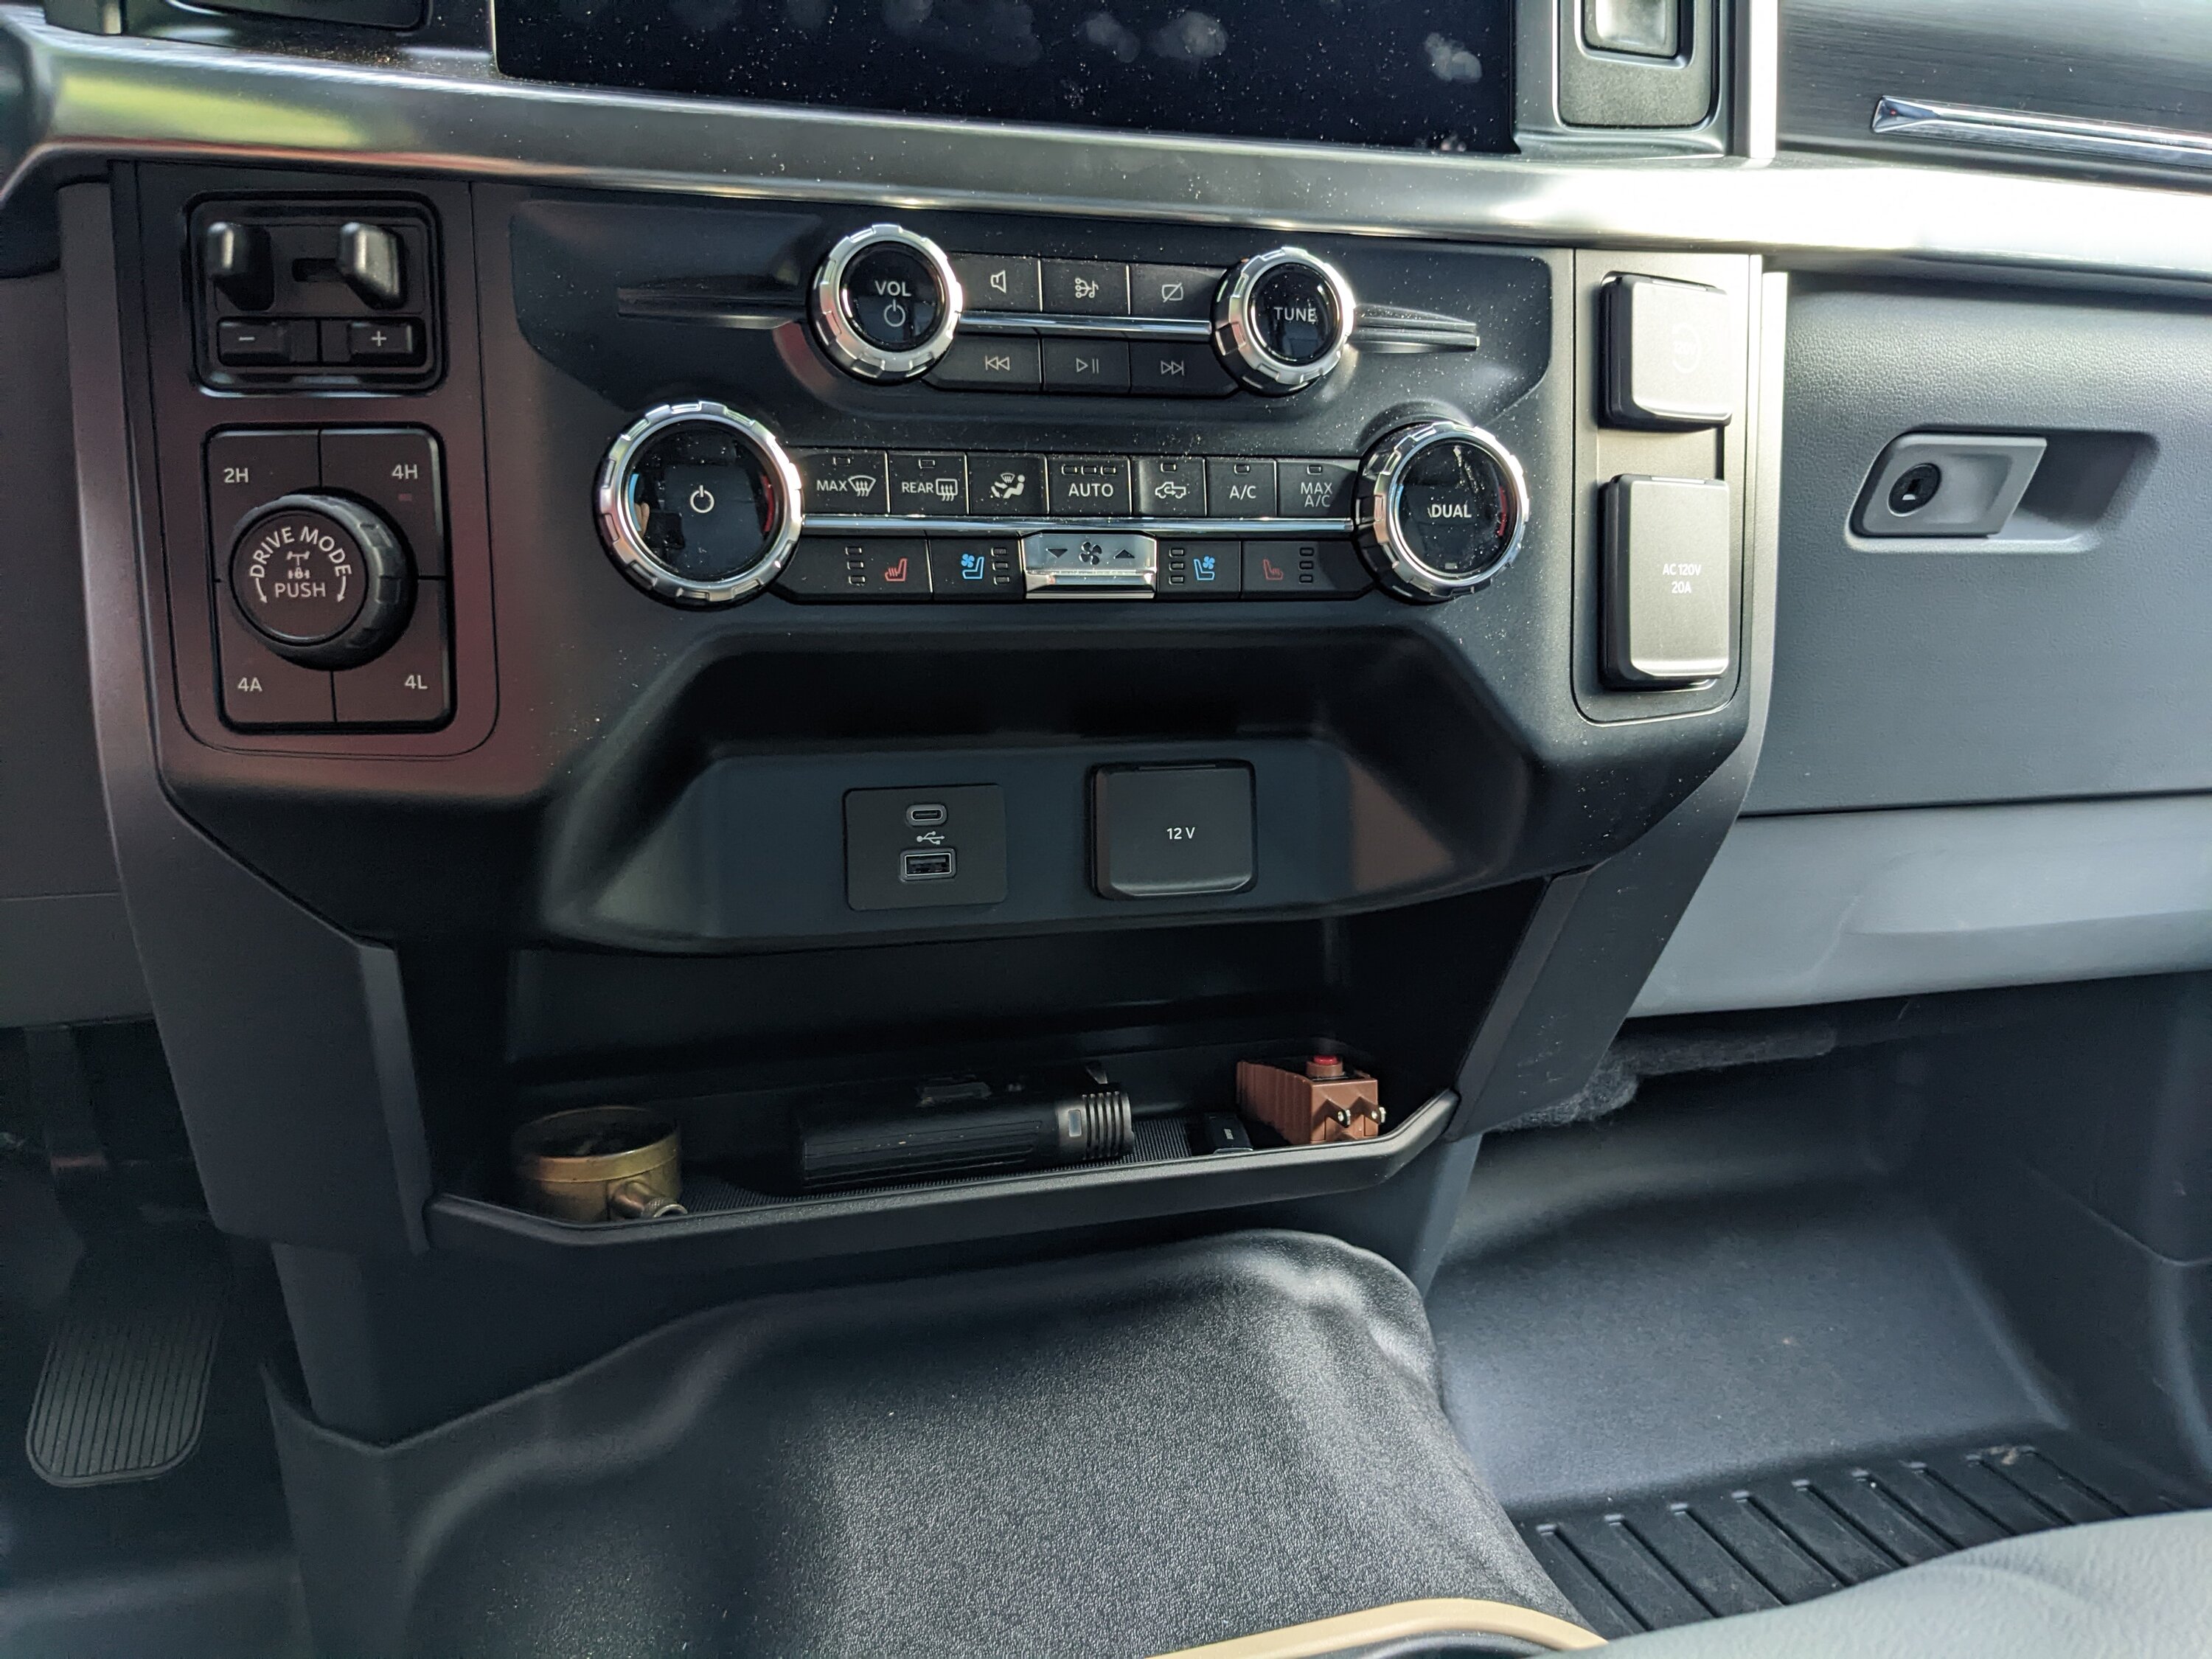 Ford F-150 Lariat powerboost with non-functioning 12v outlet on dash PXL_20220617_103651926.MP